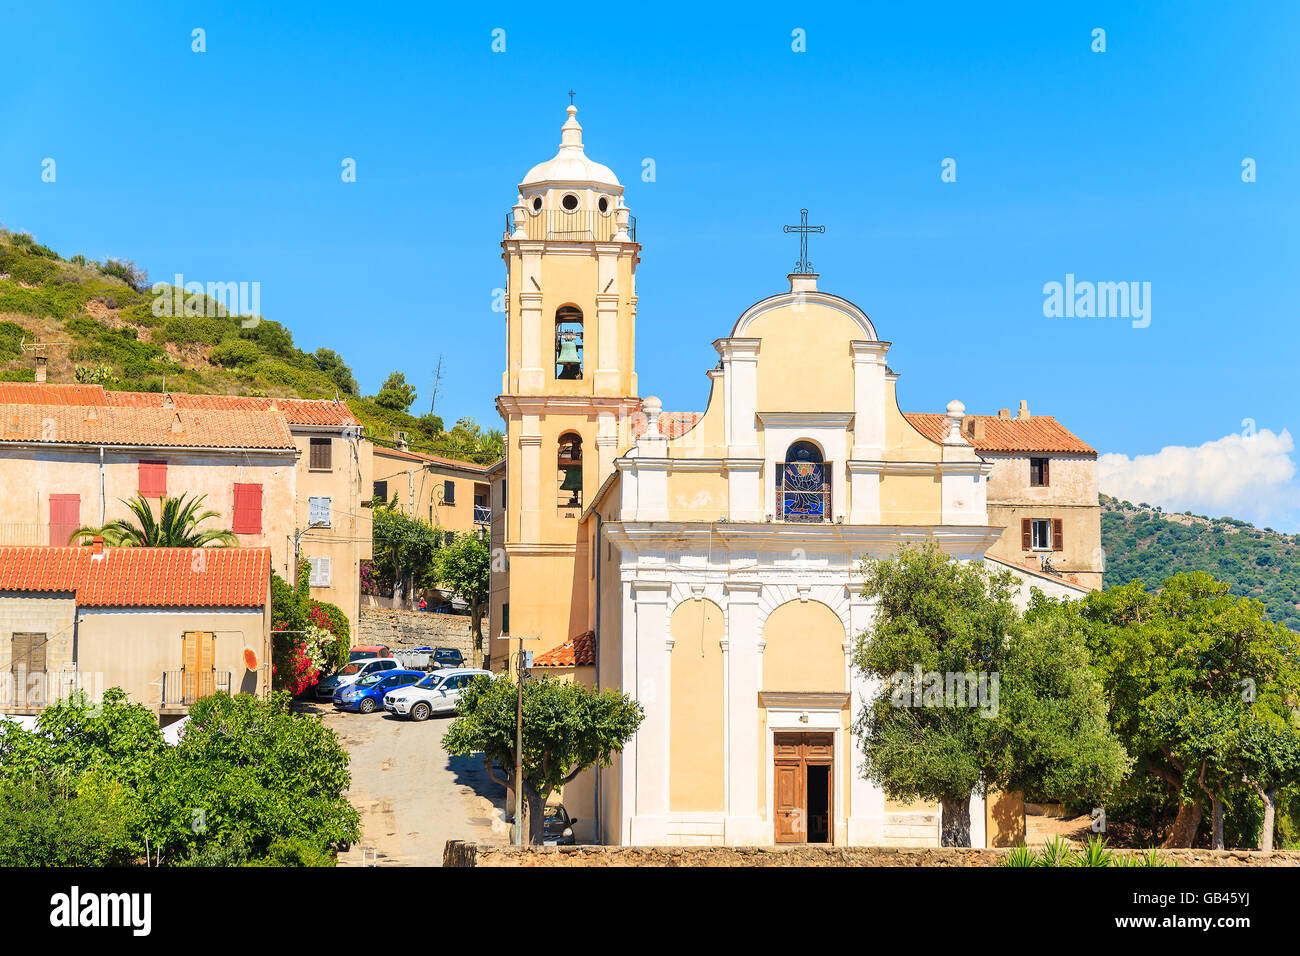 Typical church on Corsica island in Cargese village, France Stock Photo